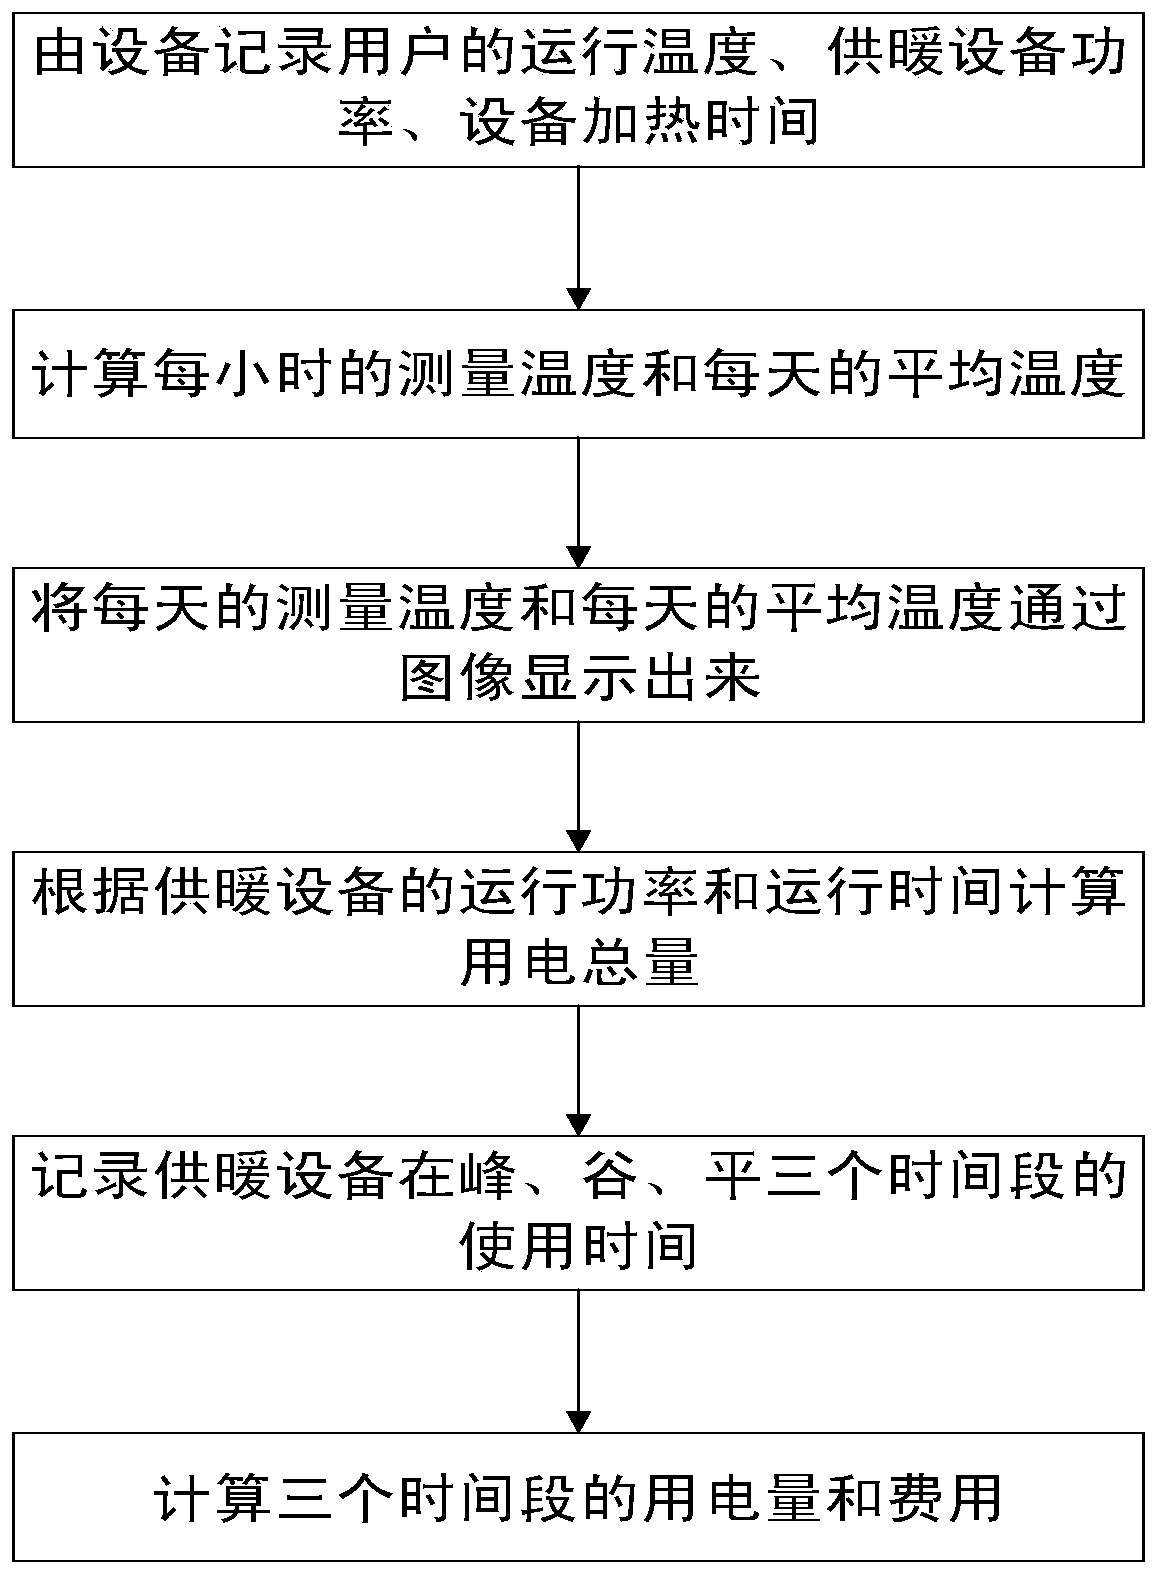 Electric heating temperature control method of peak, valley and flat electricity price operation function